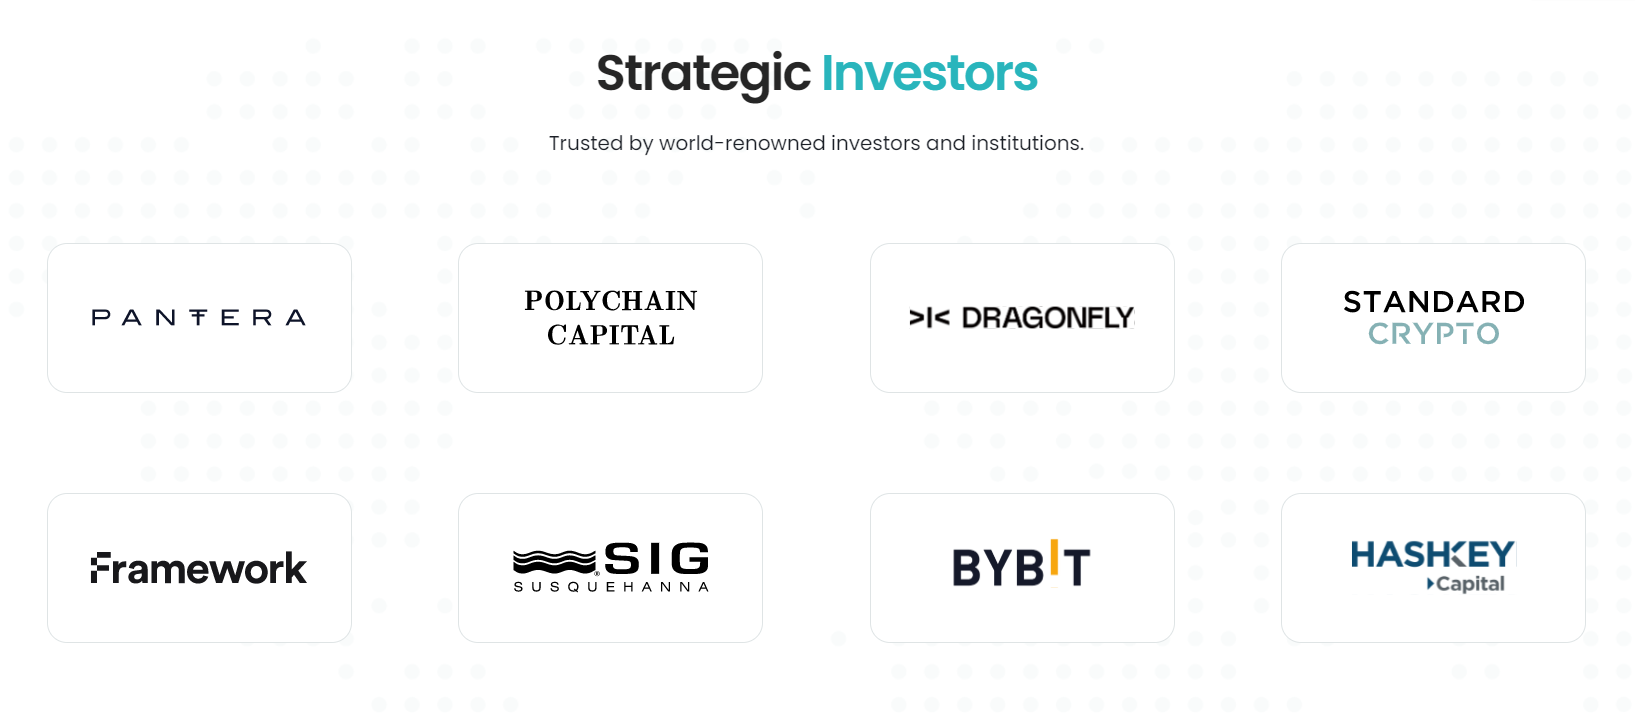 synfutures investors